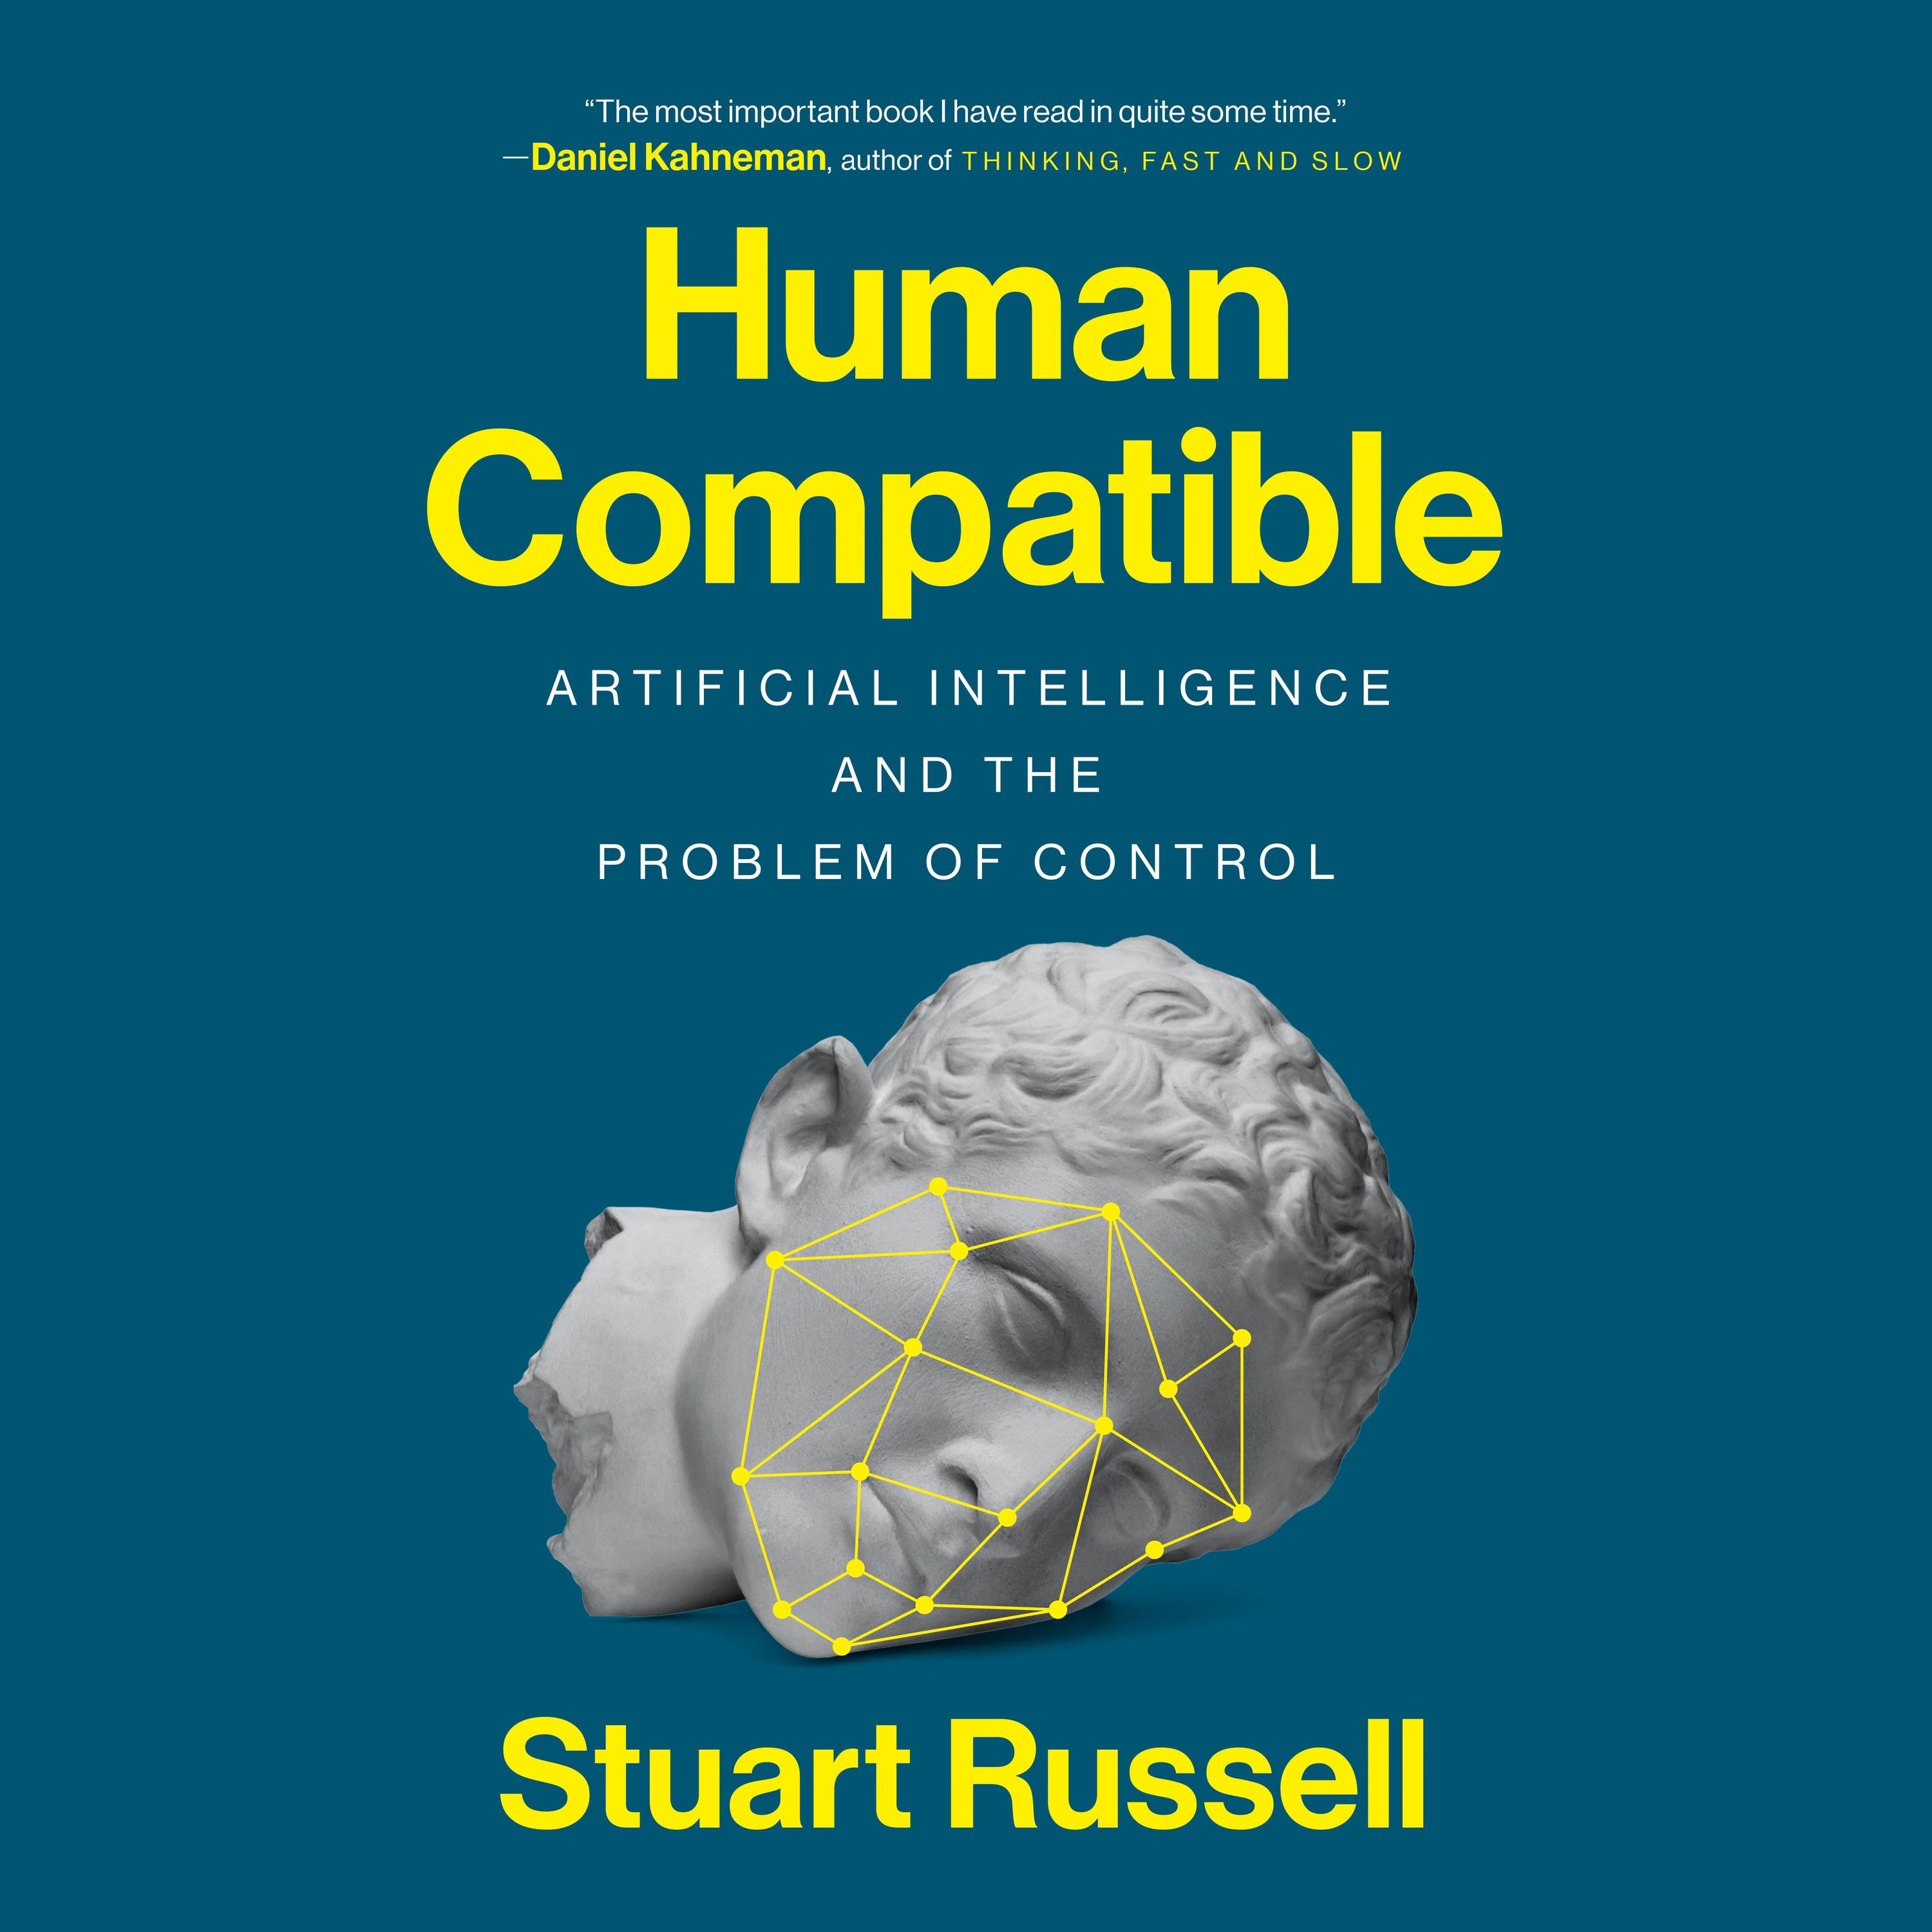 human compatible russell